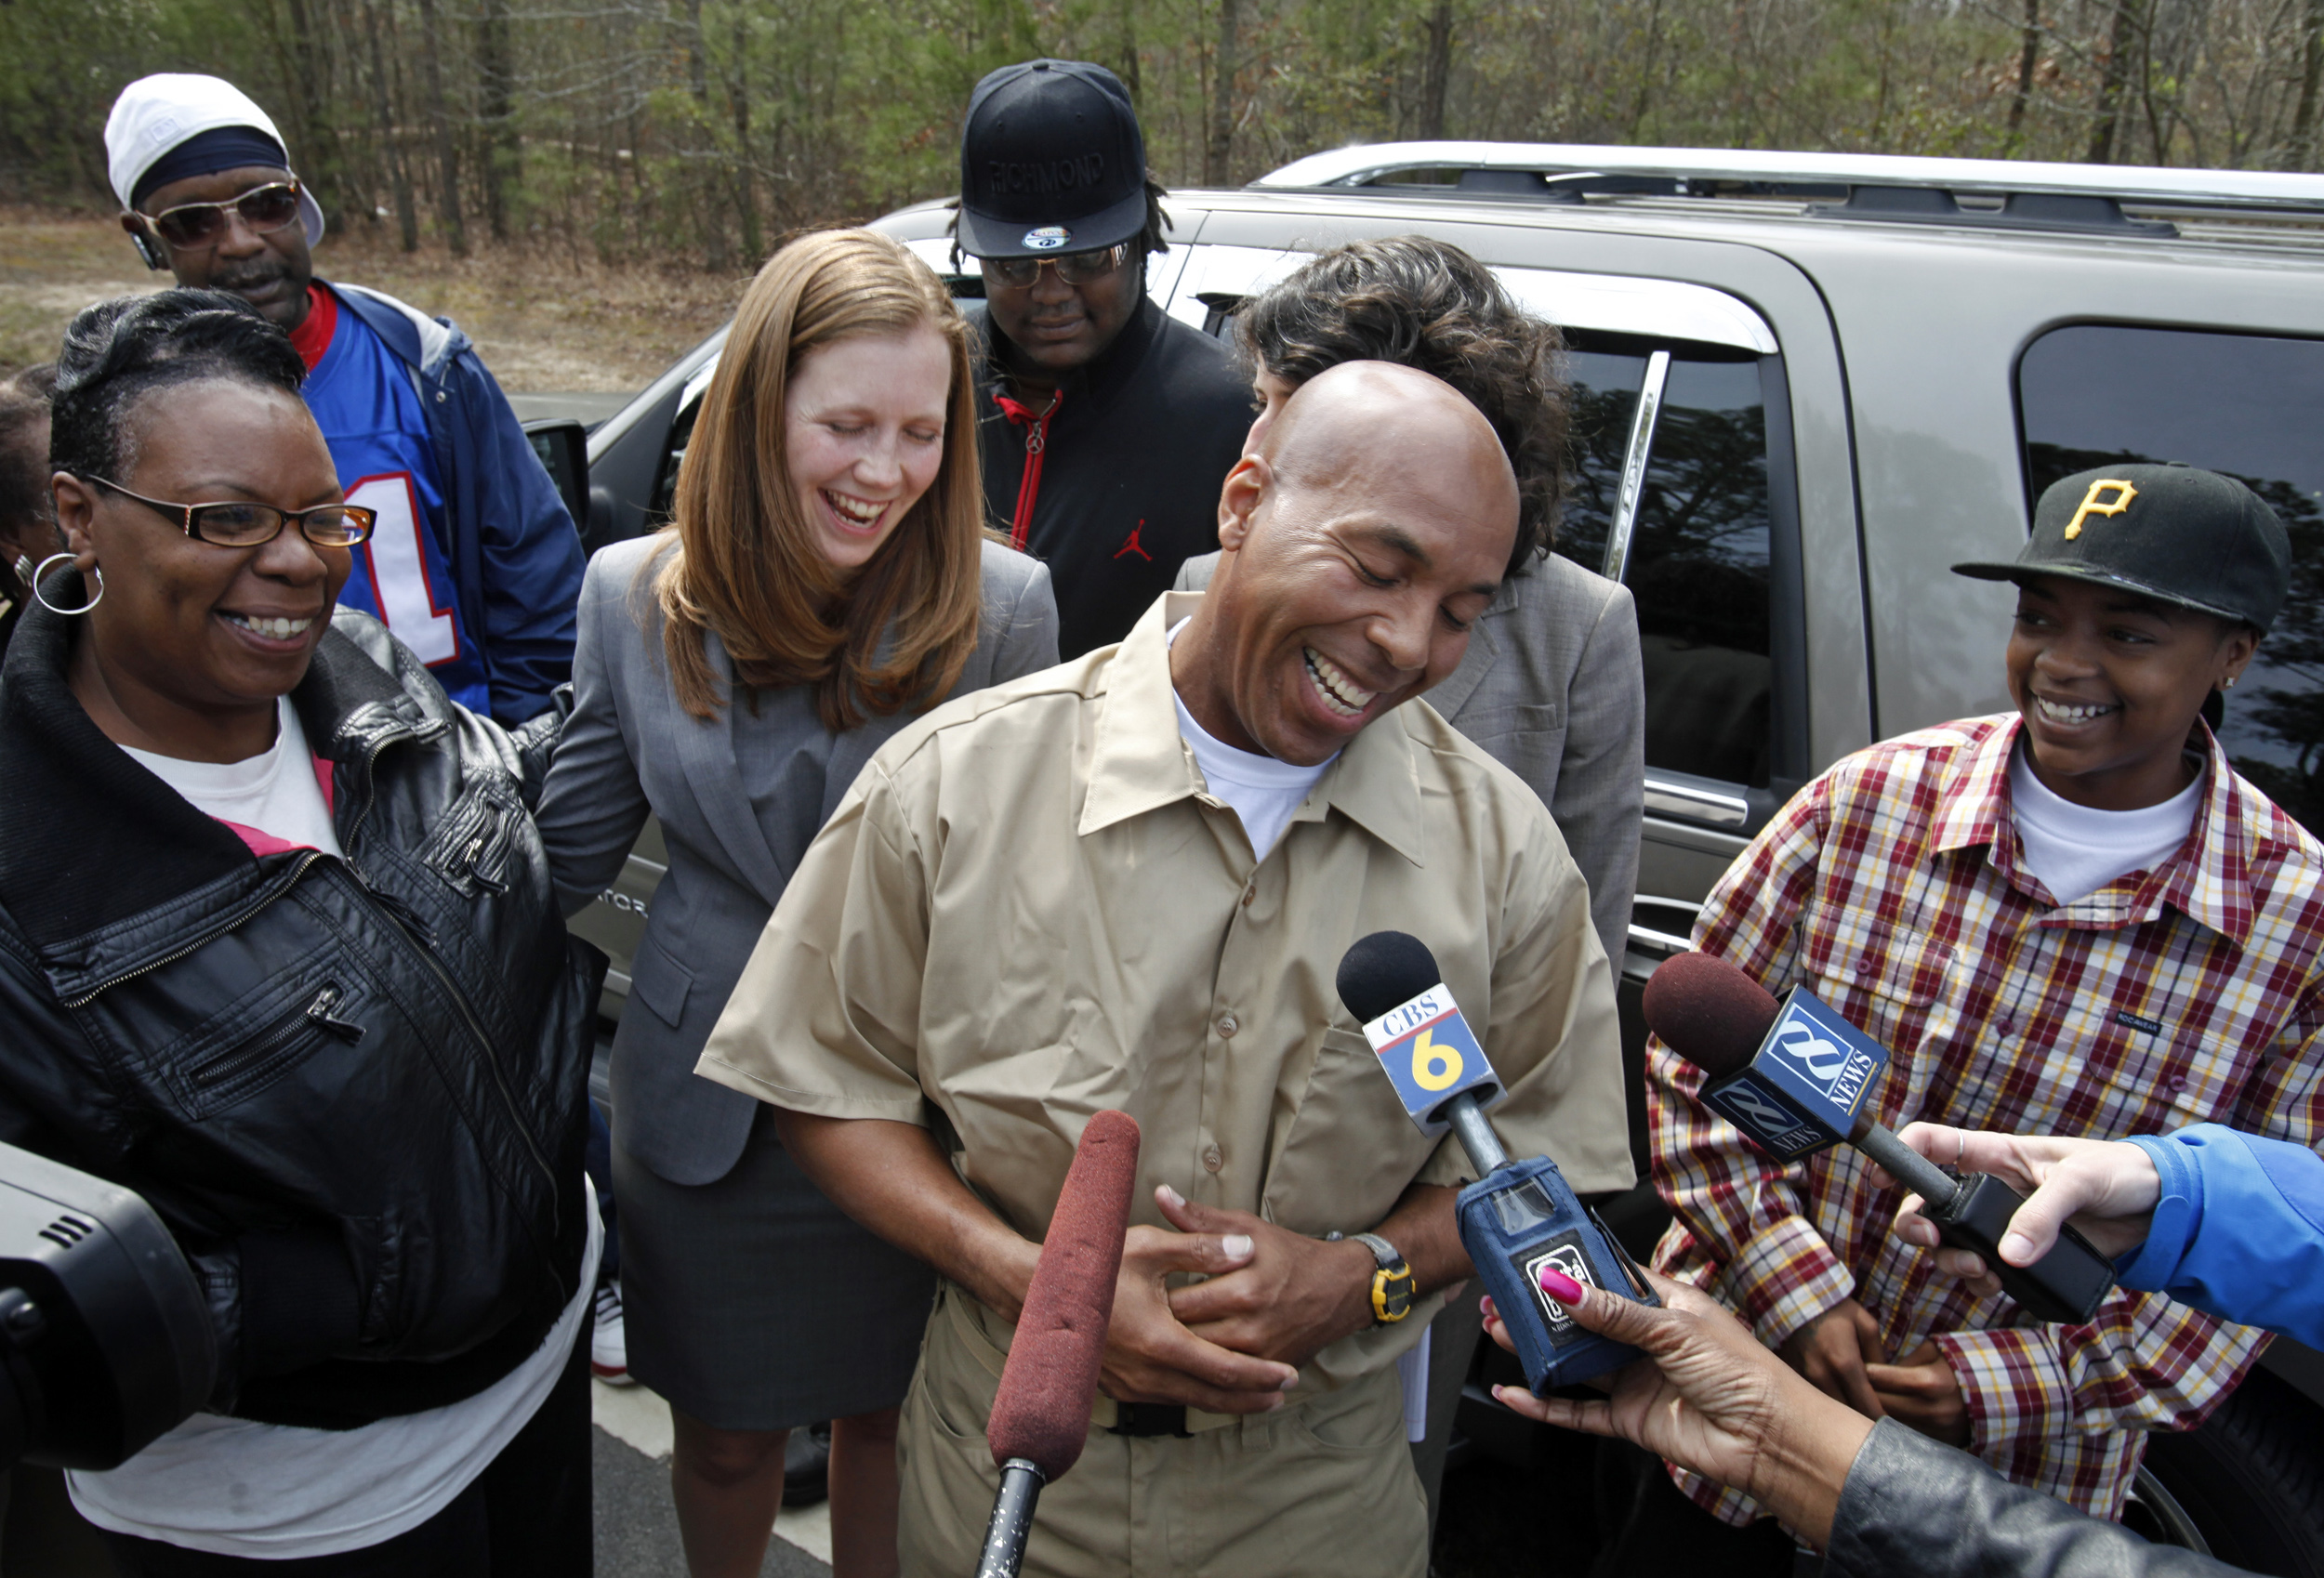 Thomas Haynesworth answers questions from the media after he was released from the Greensville Correctional Center in Jarratt, Va., on March 21, 2011. (P. Kevin Morley—Richmond Times-Dispatch/AP)